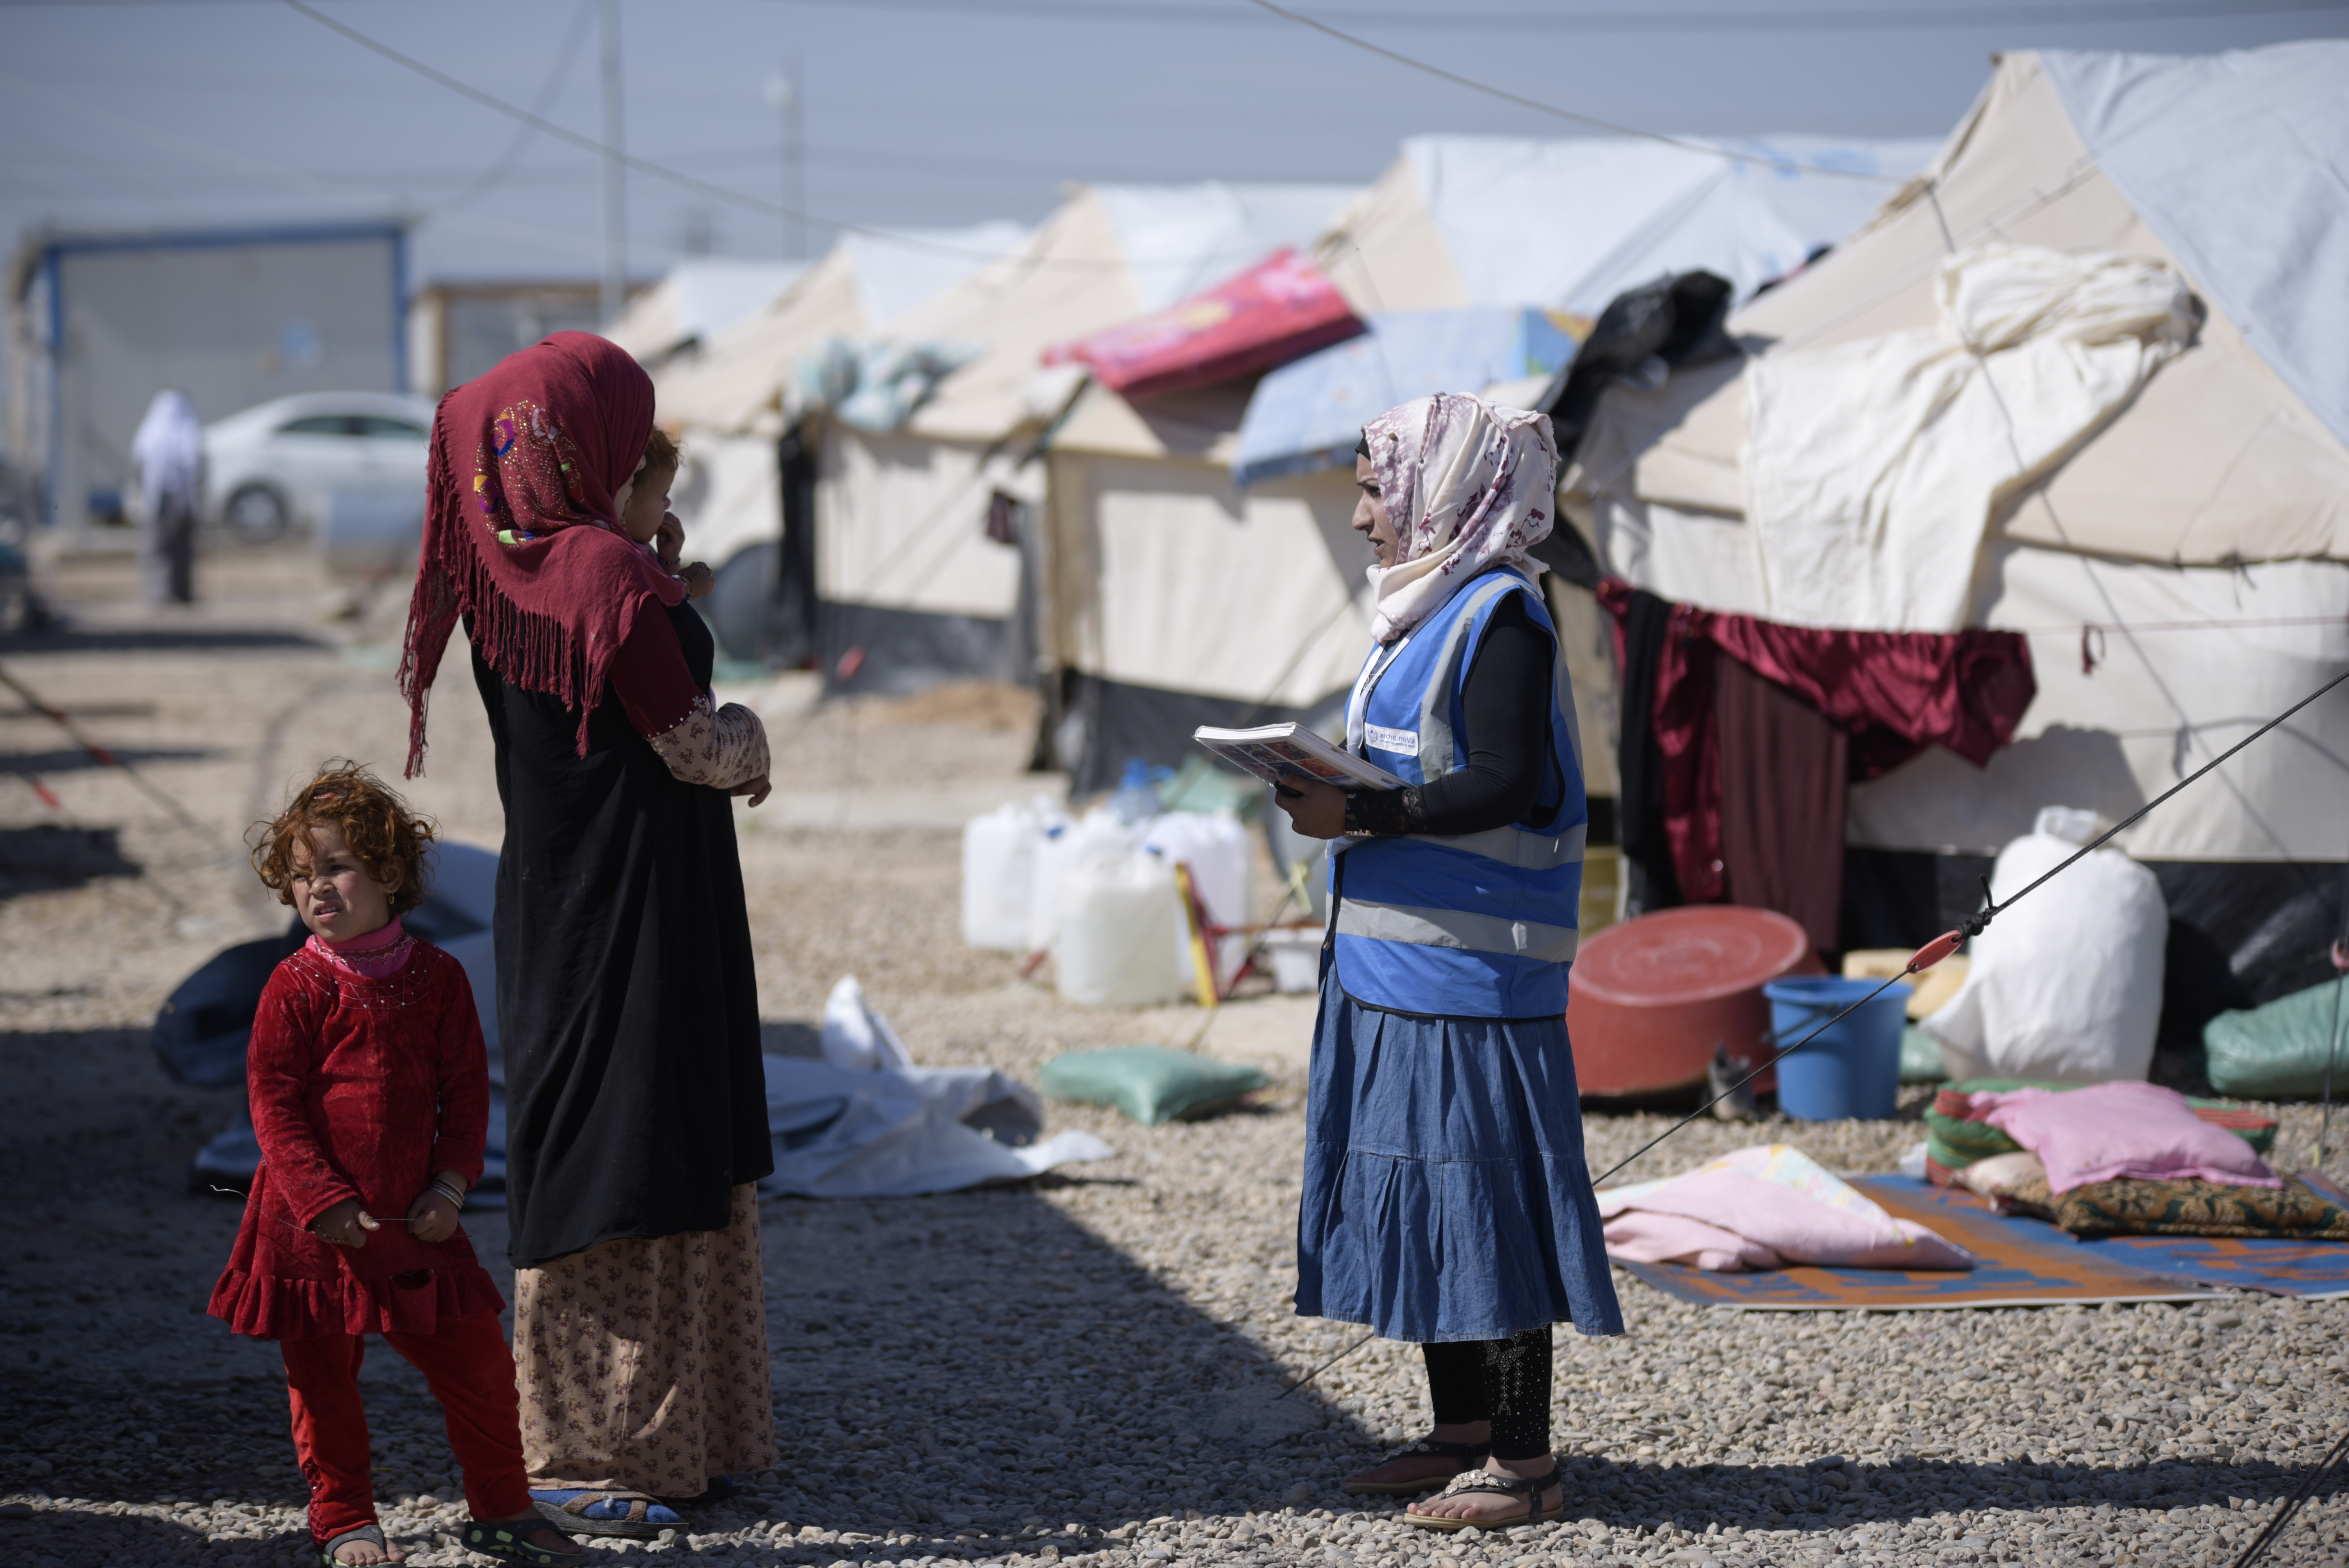 A hygiene promoter in conversation with a mother who has two small children with her, in the background tents of a camp